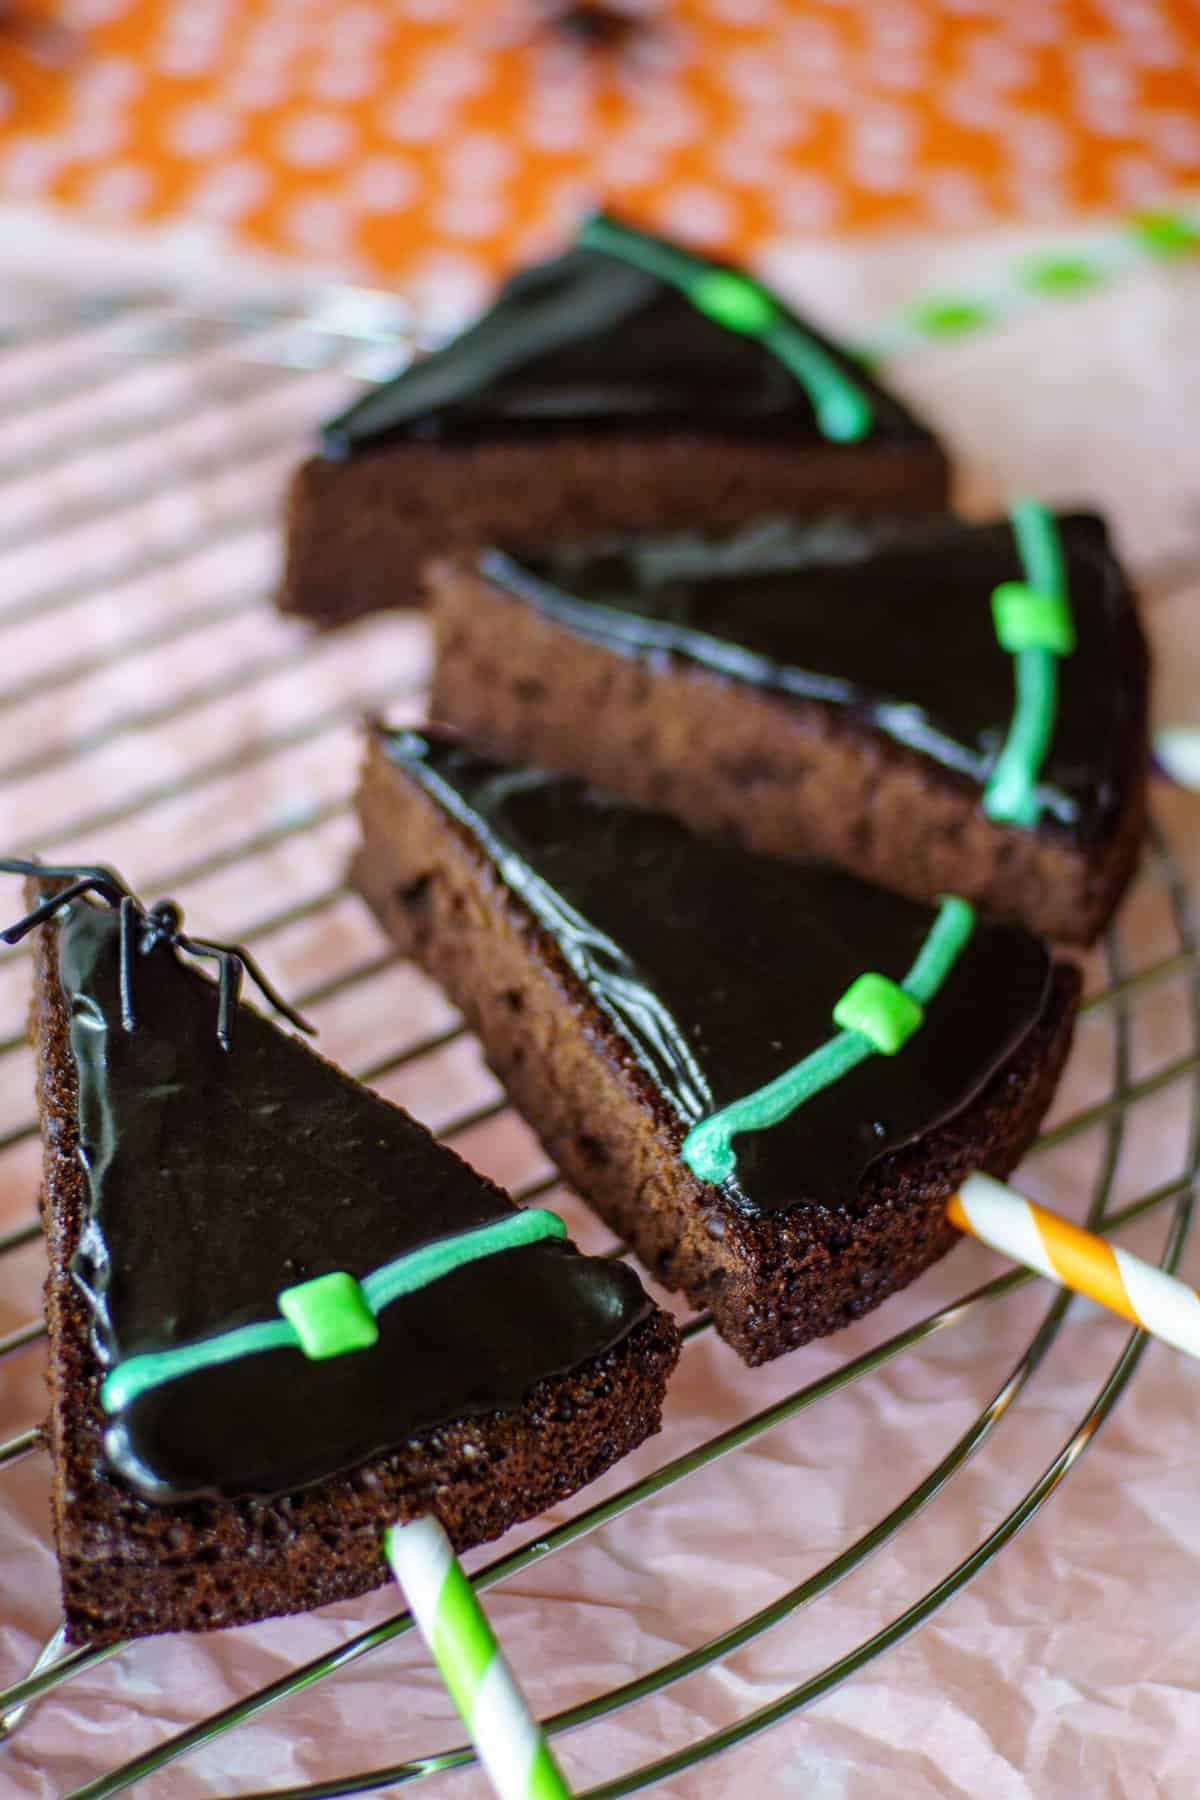 Brownie pops cut into the shape of a witches hat and covered with chocolate frosting.